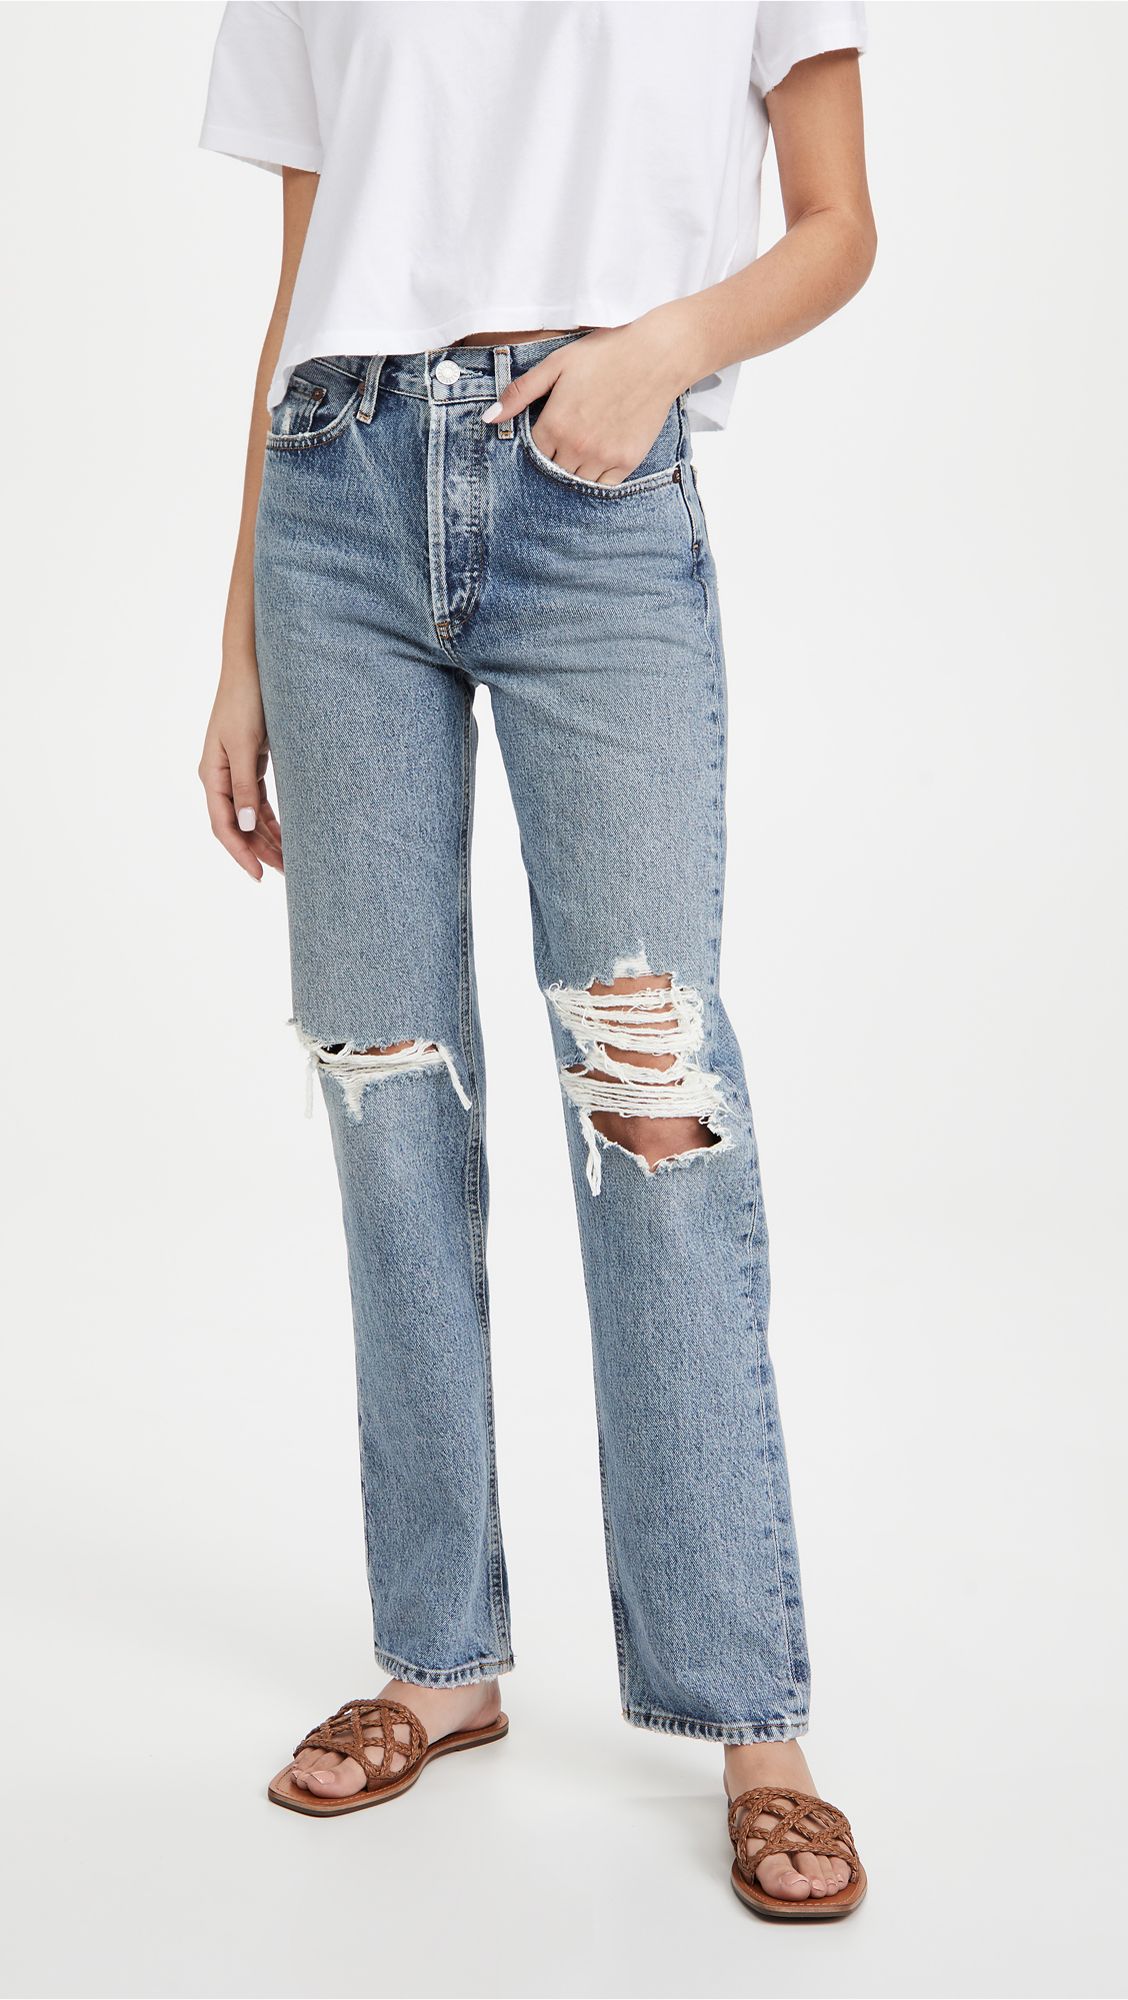 The 5 Best Designer Jeans Brands for Women Who What Wear